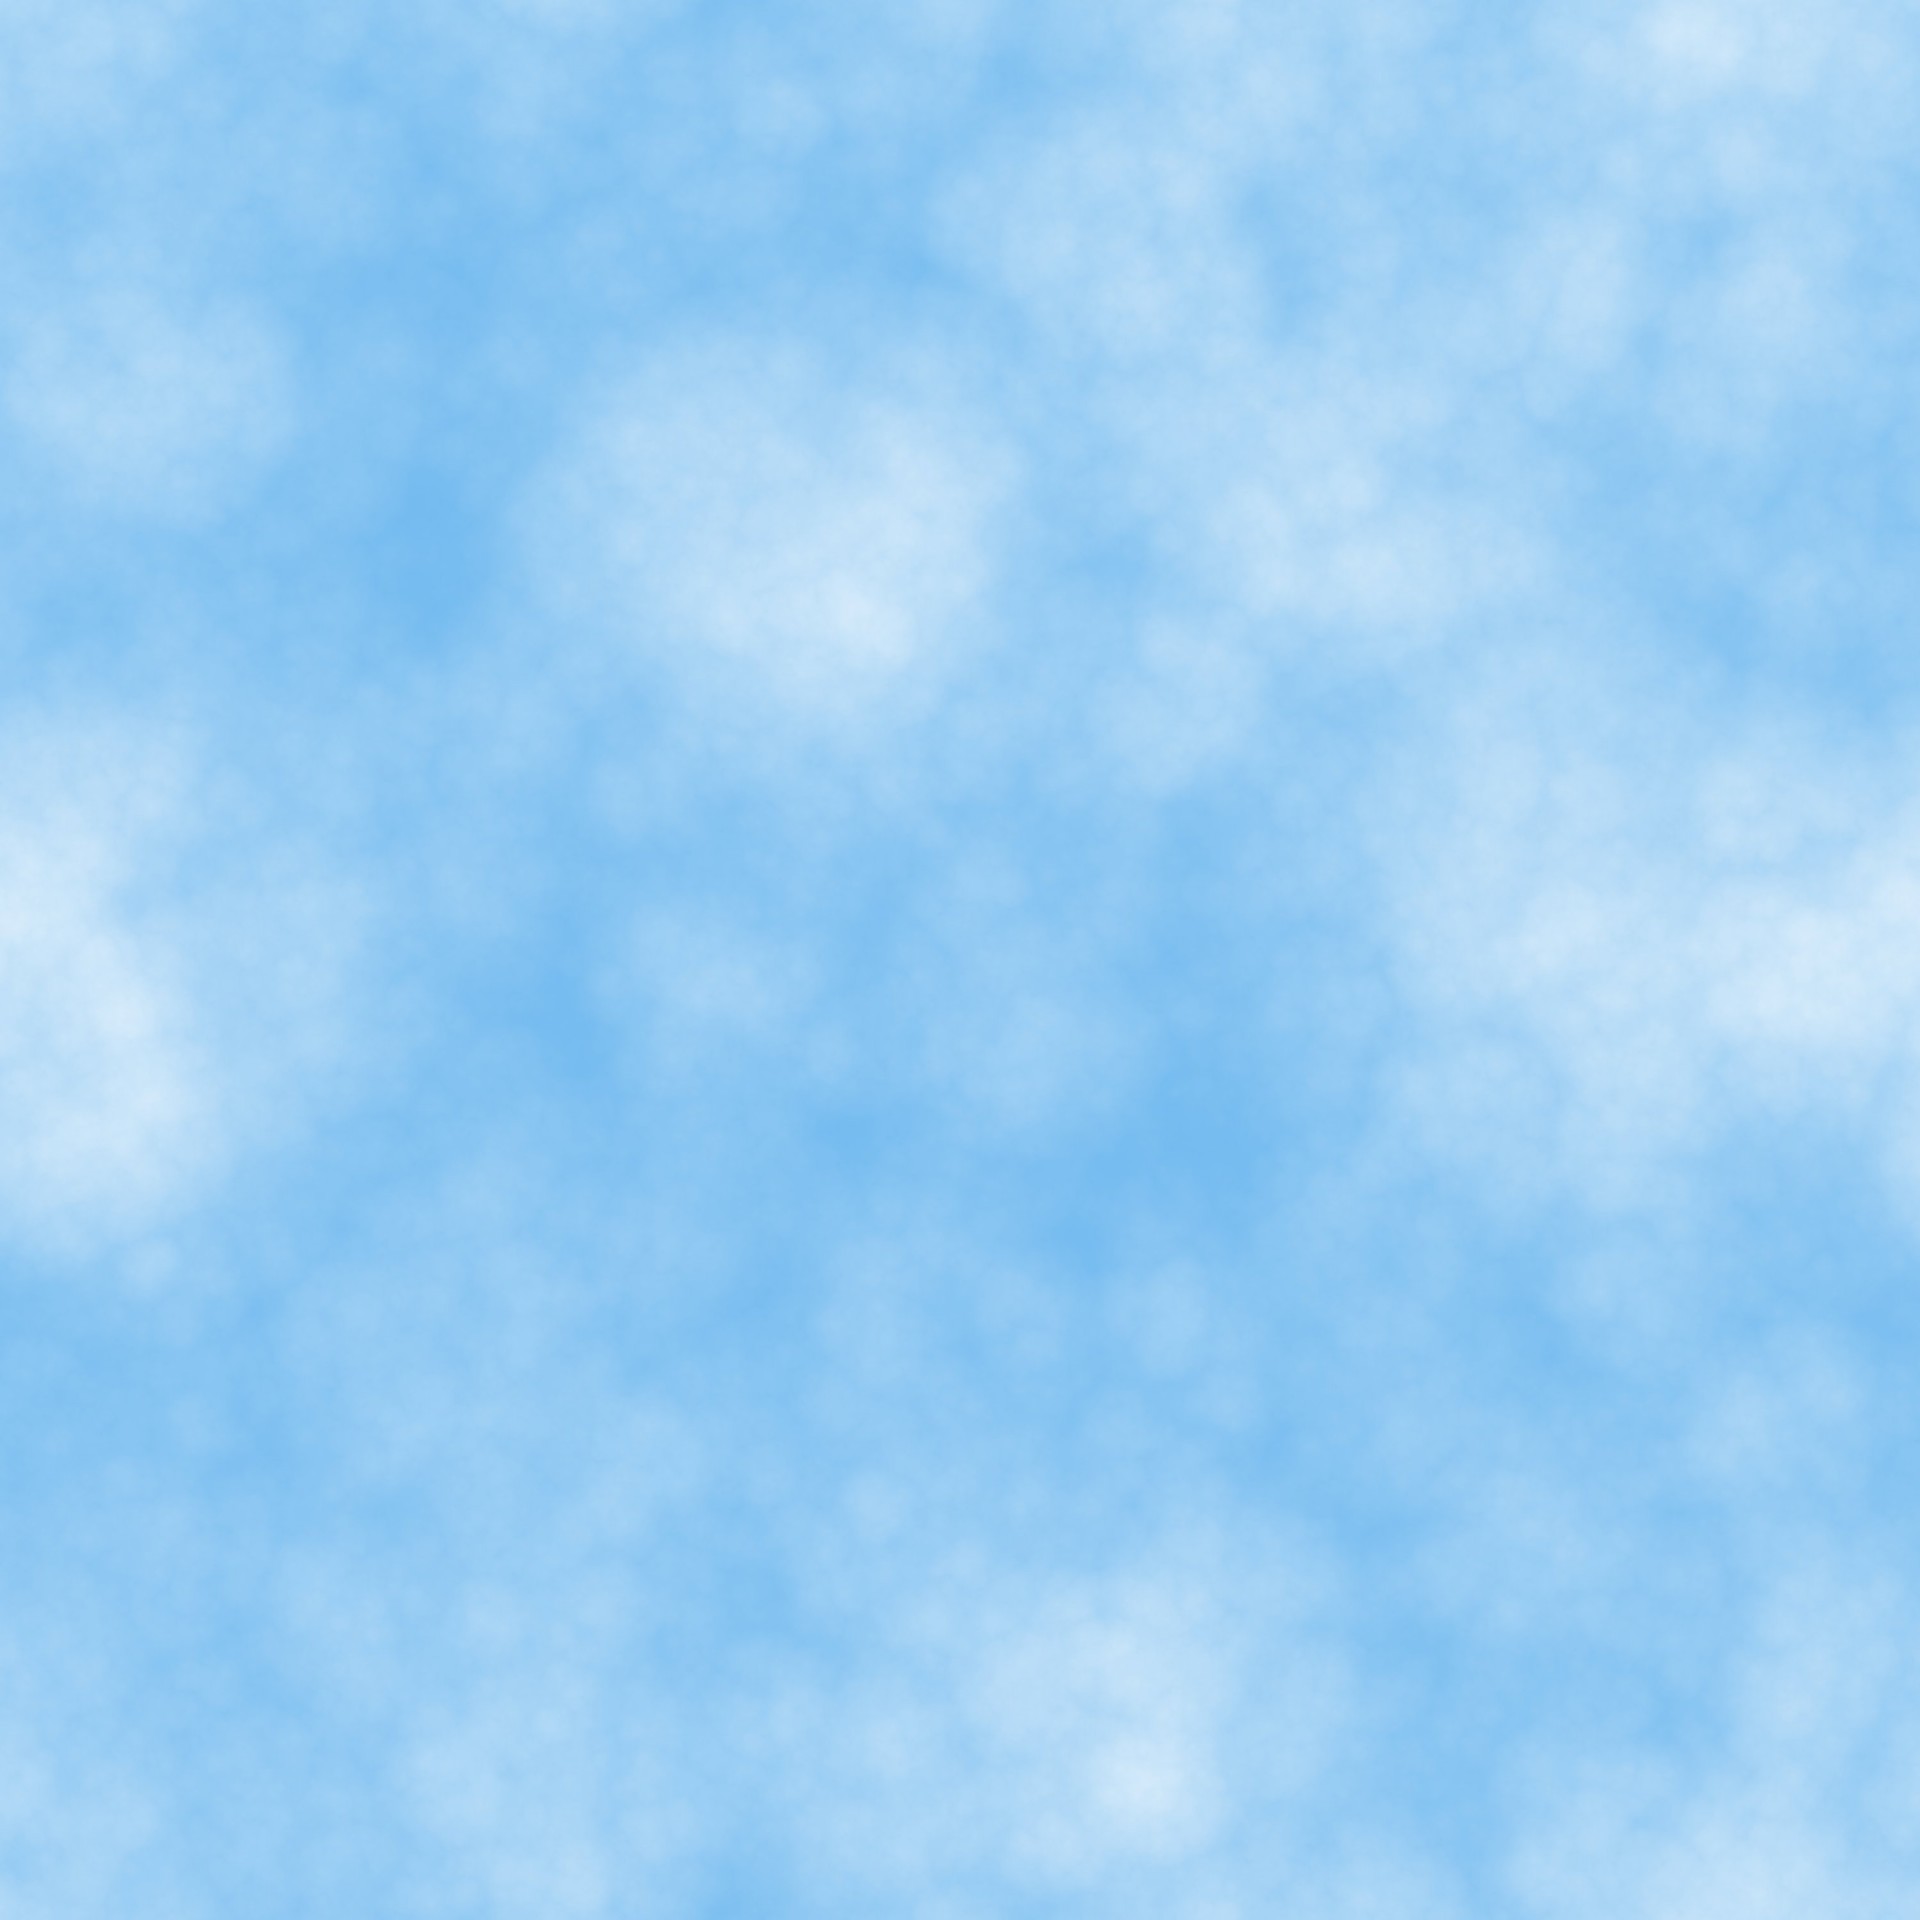 Download Free Photo Of Blue Clouds Background High Resolution From Needpix Com